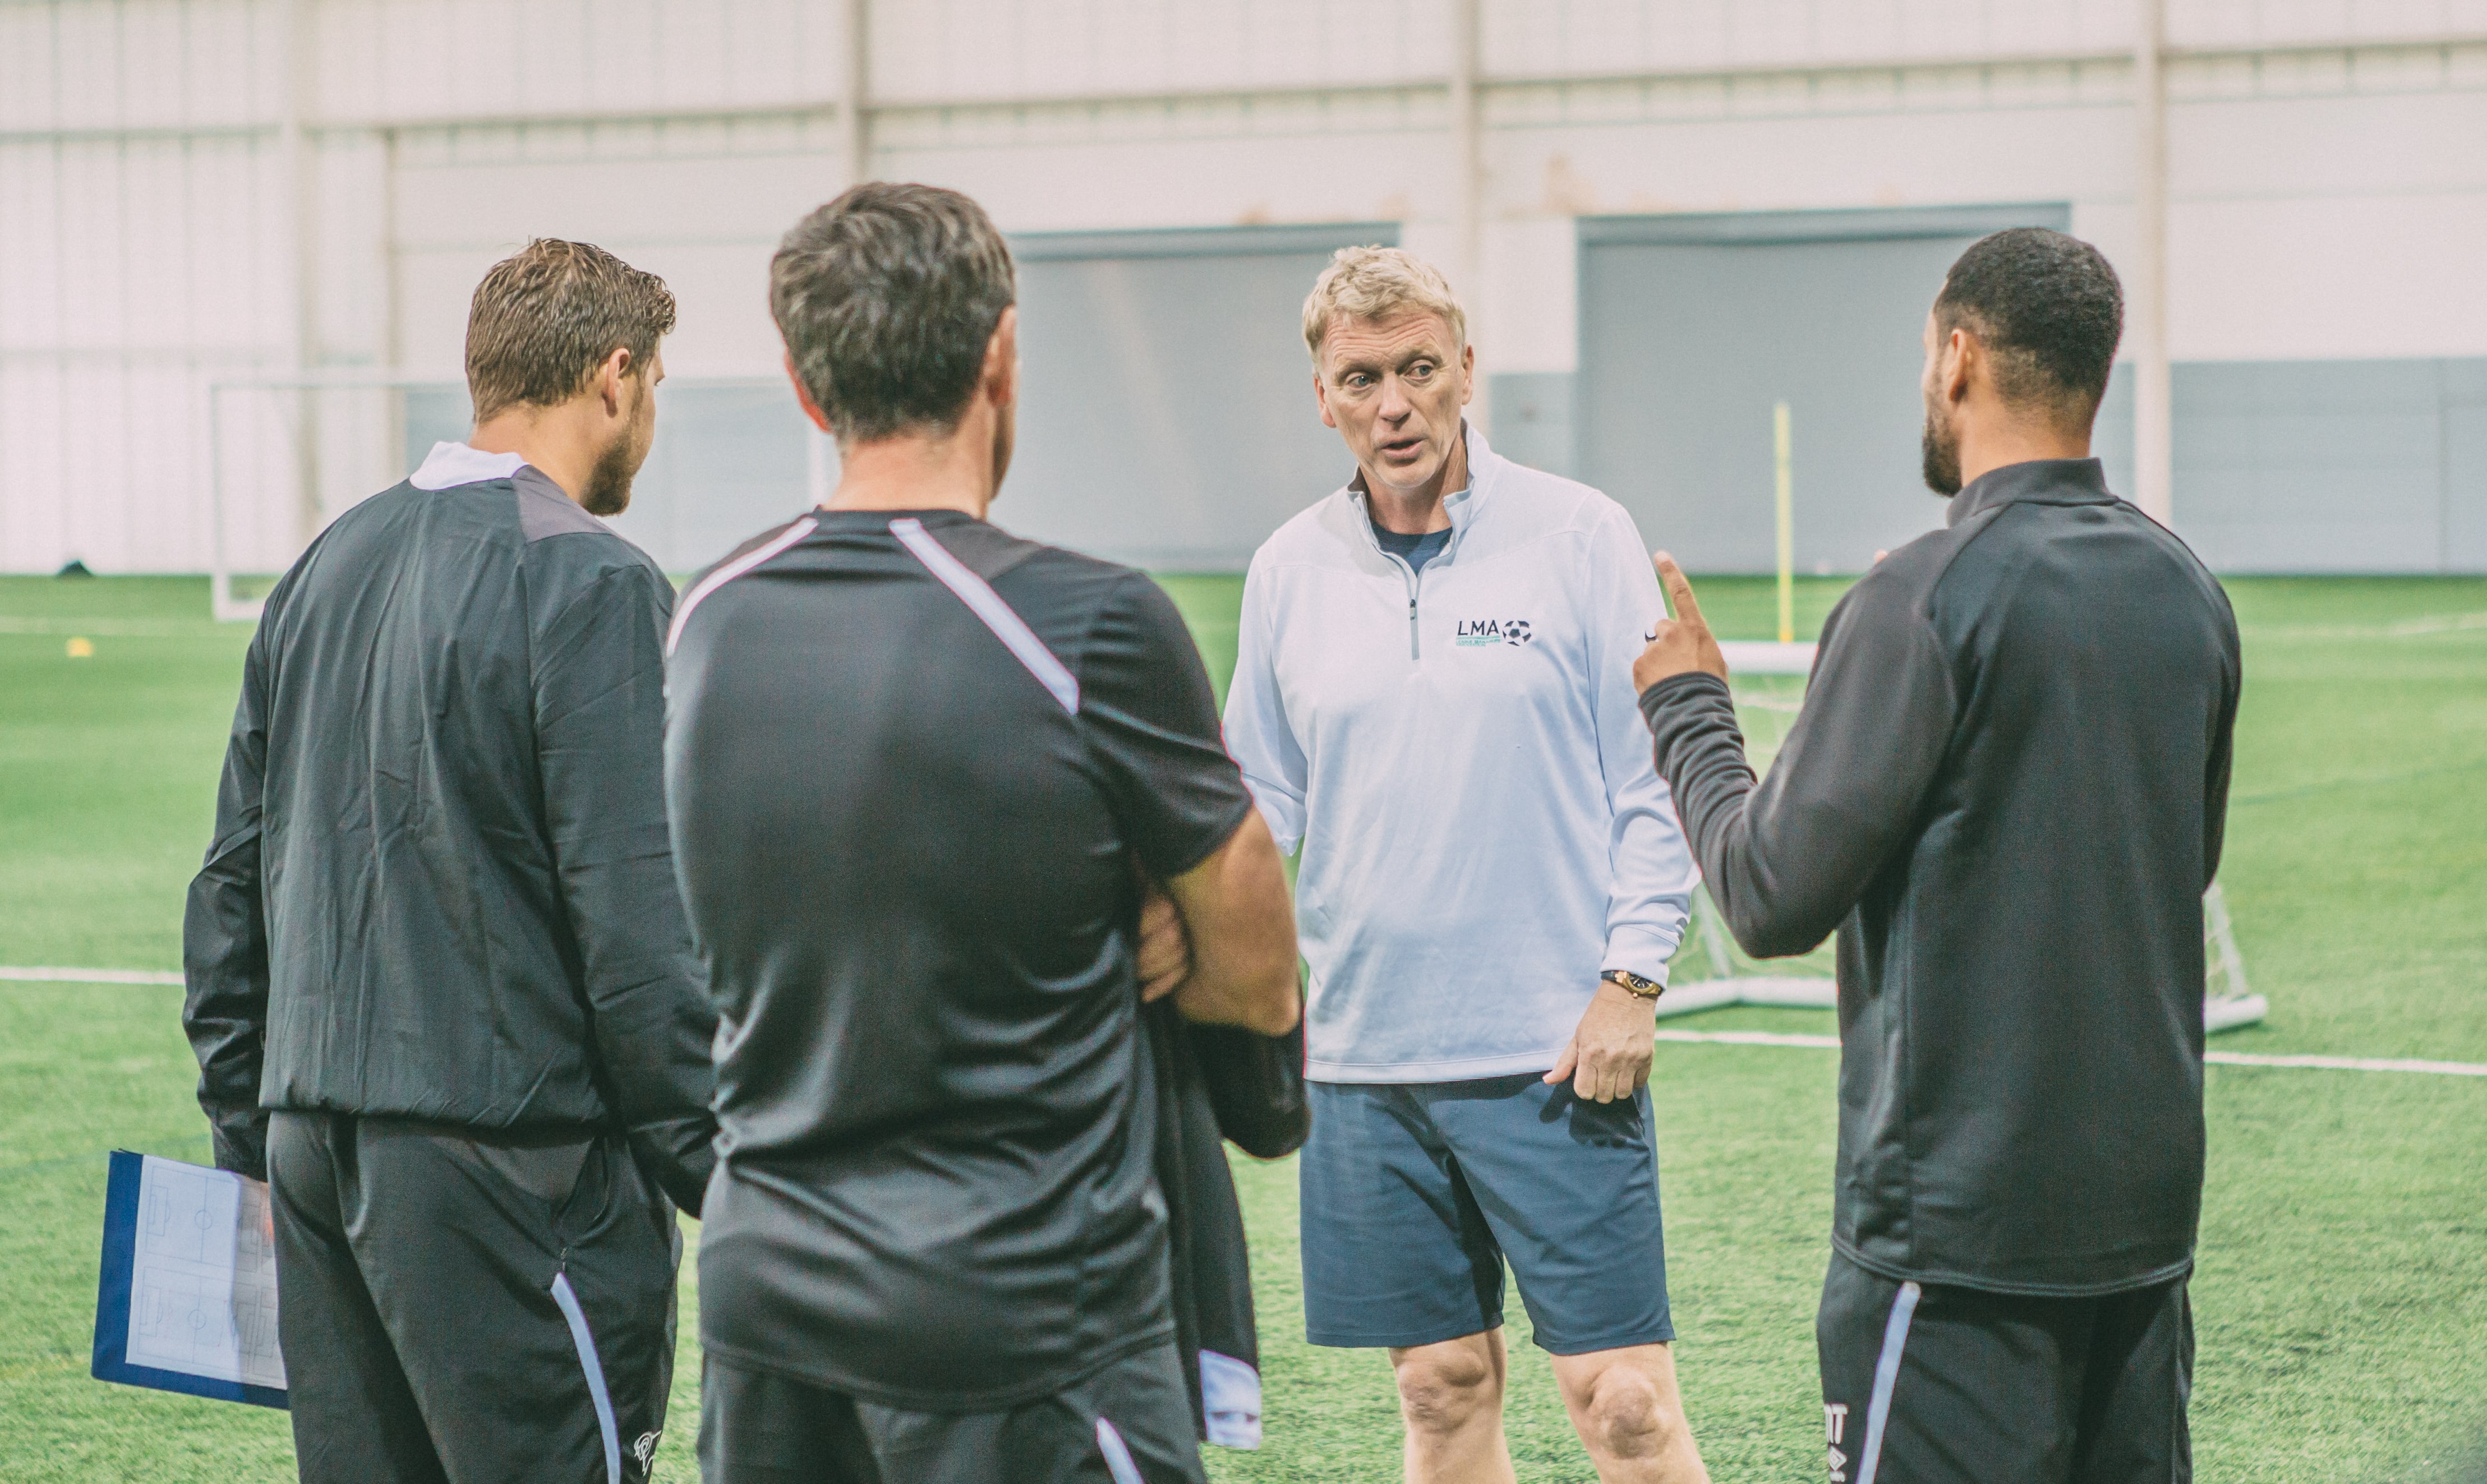 5 Valuable Approaches a DOC Should Take When Mentoring Soccer Coaches